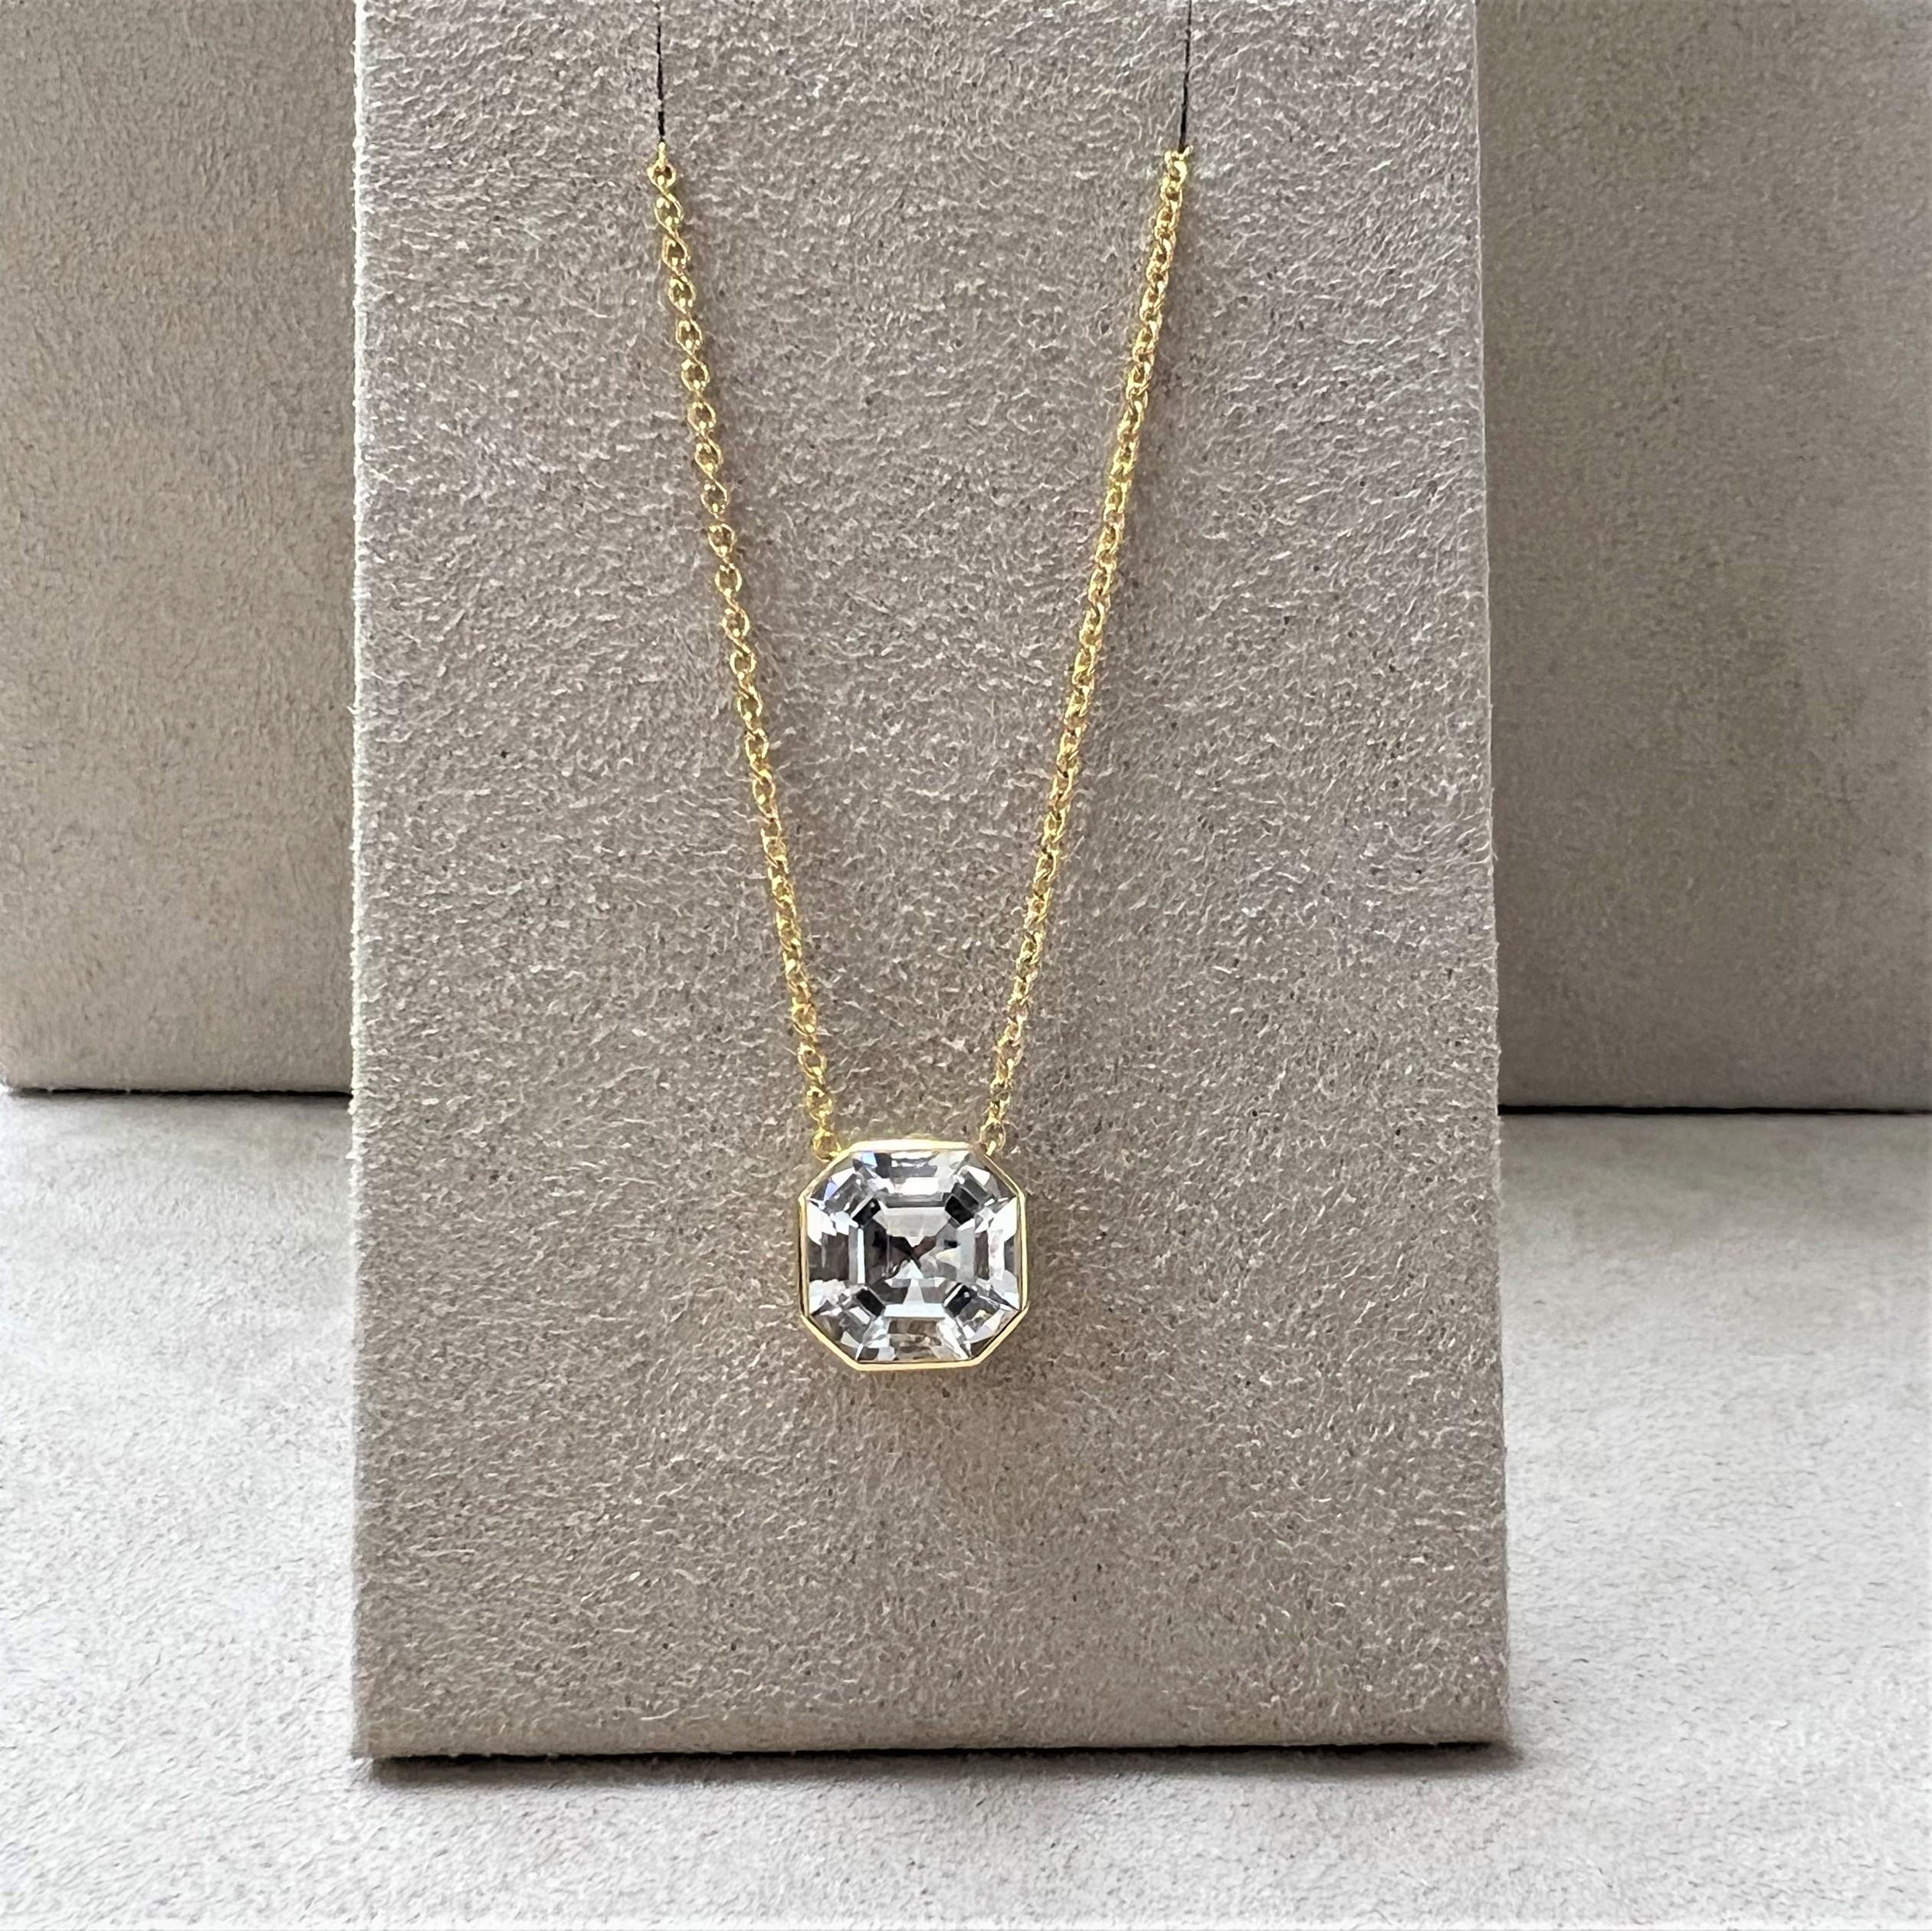 Created in 18 karat yellow gold
Rock Crystal 4 carats approx.
18 inch necklace with loops at 16 and 17 inch
Lobster lock

 About the Designers ~ Dharmesh & Namrata

Drawing inspiration from little things, Dharmesh & Namrata Kothari have created an